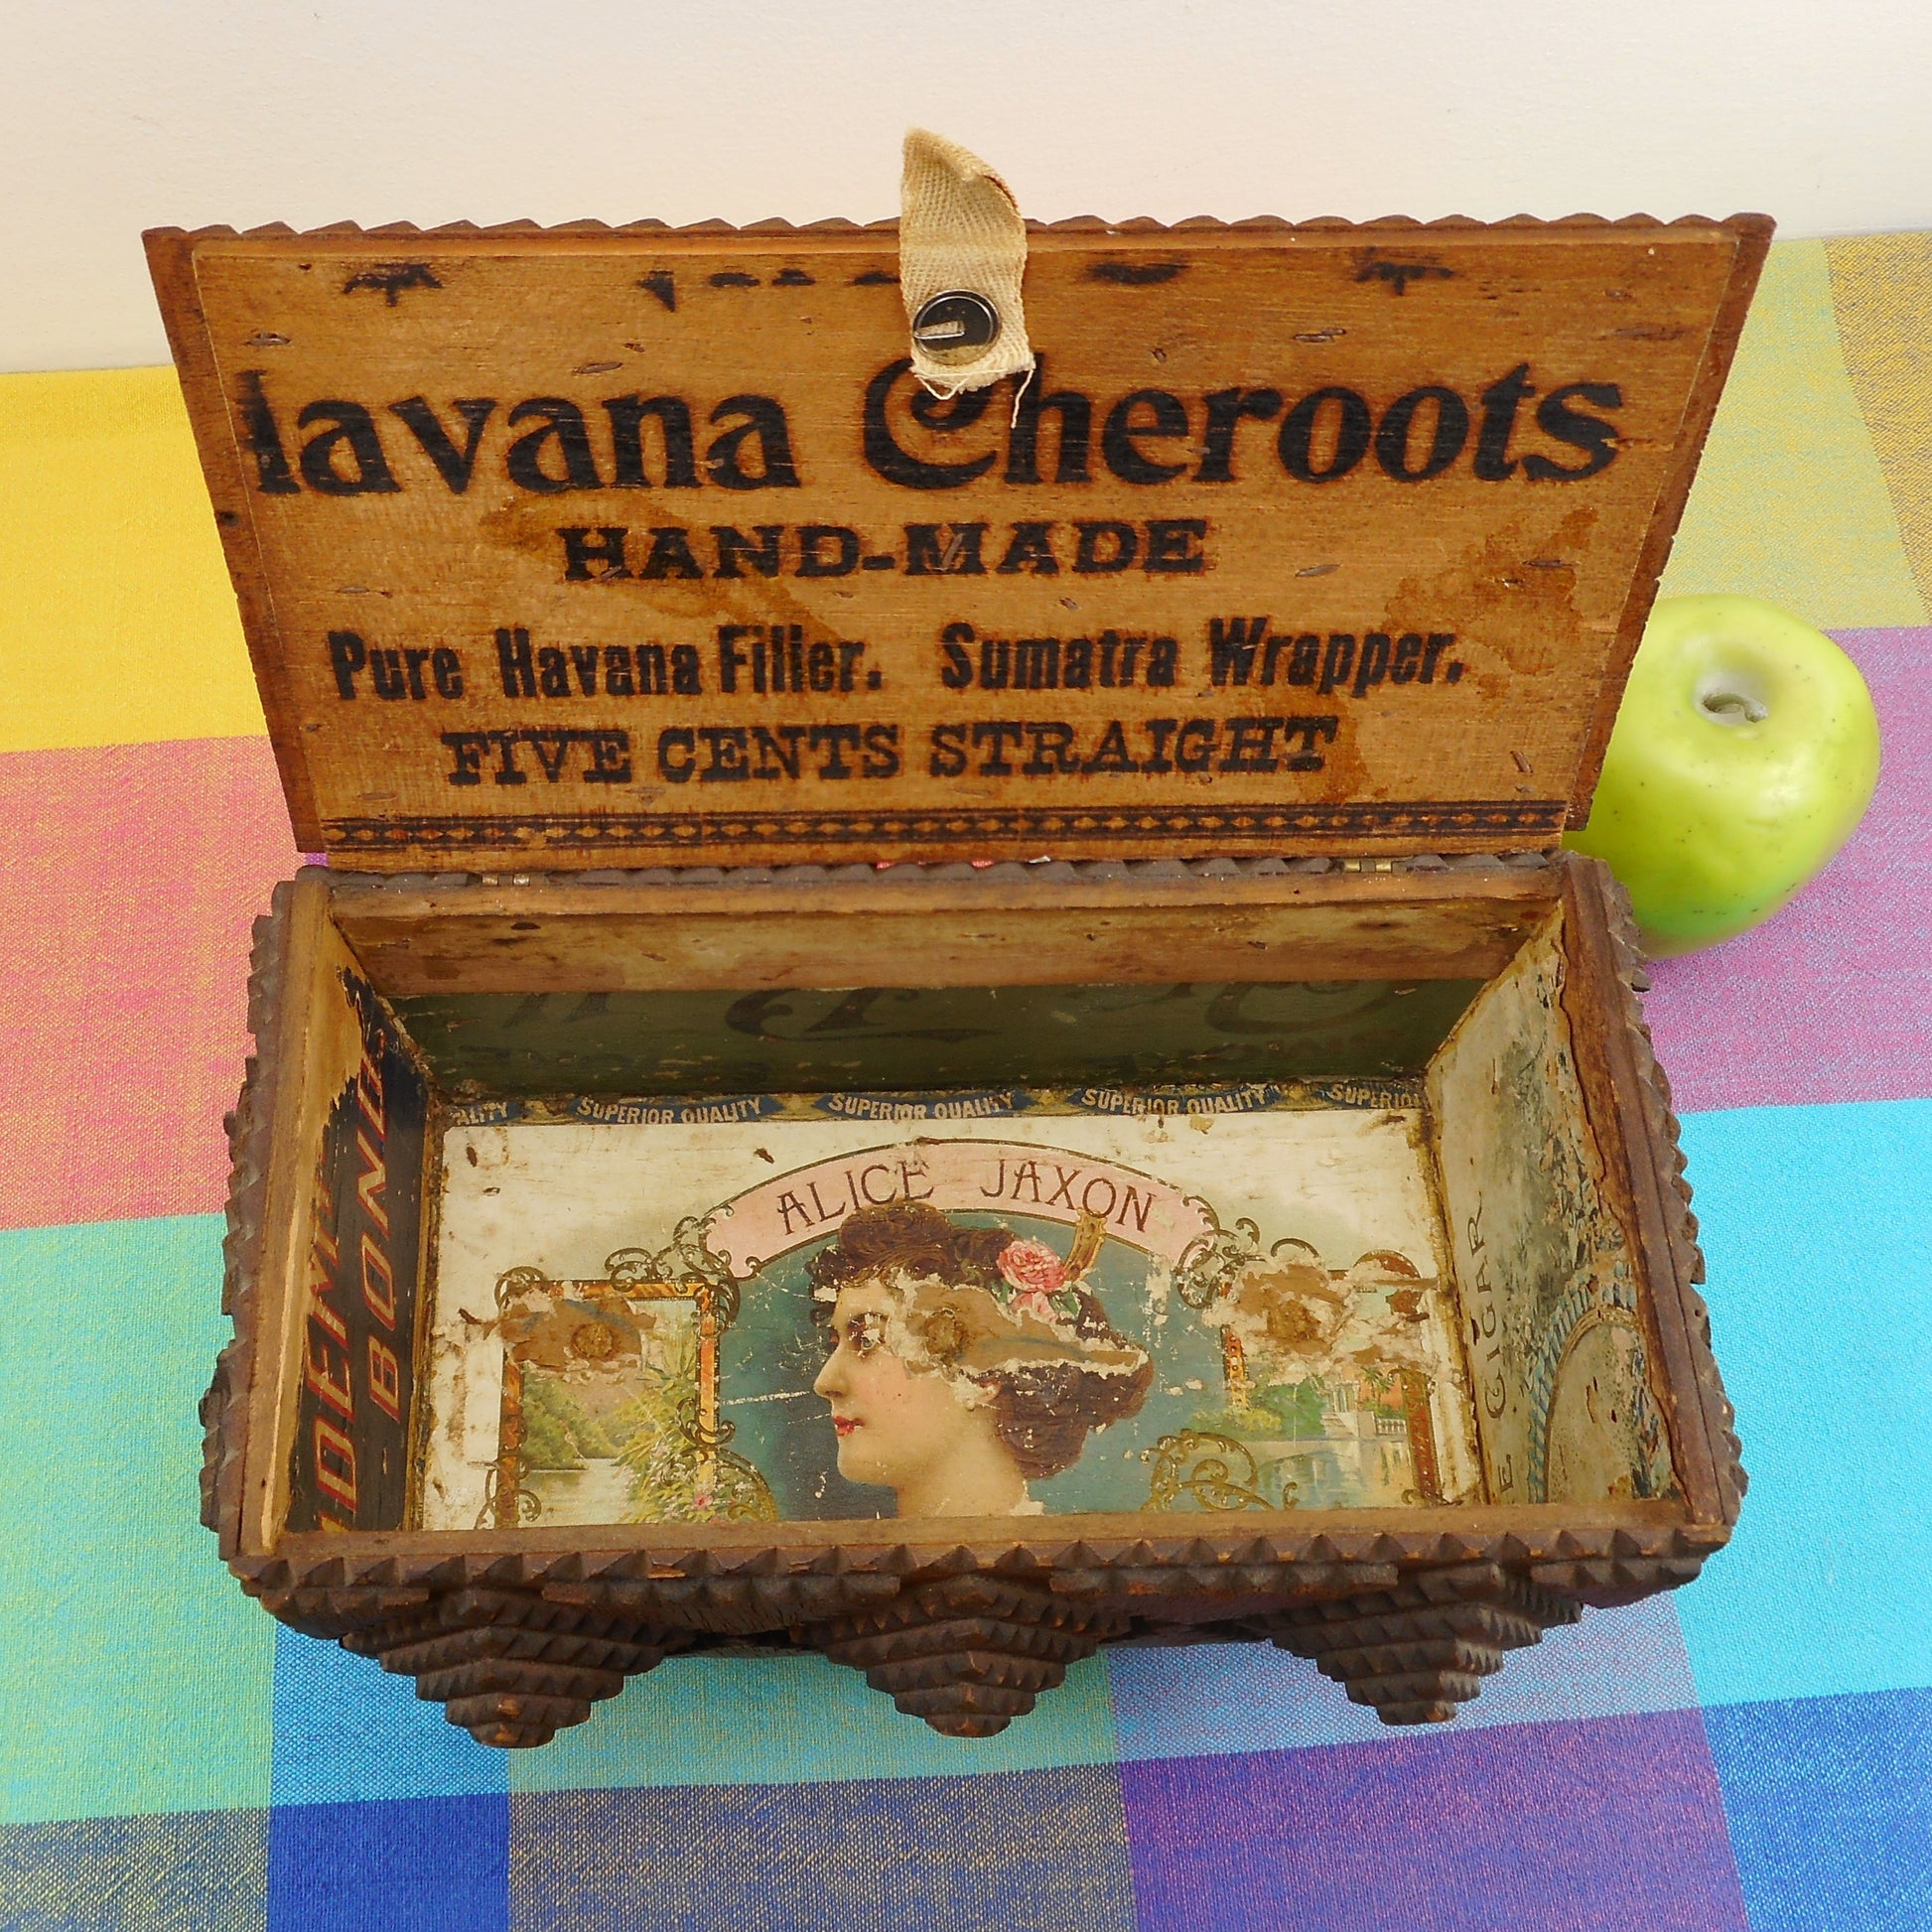 Antique Tramp Folk Art Carved From Cigar Box Footed Chest - 5 Cent Havana Cheroots Ladies Romantic